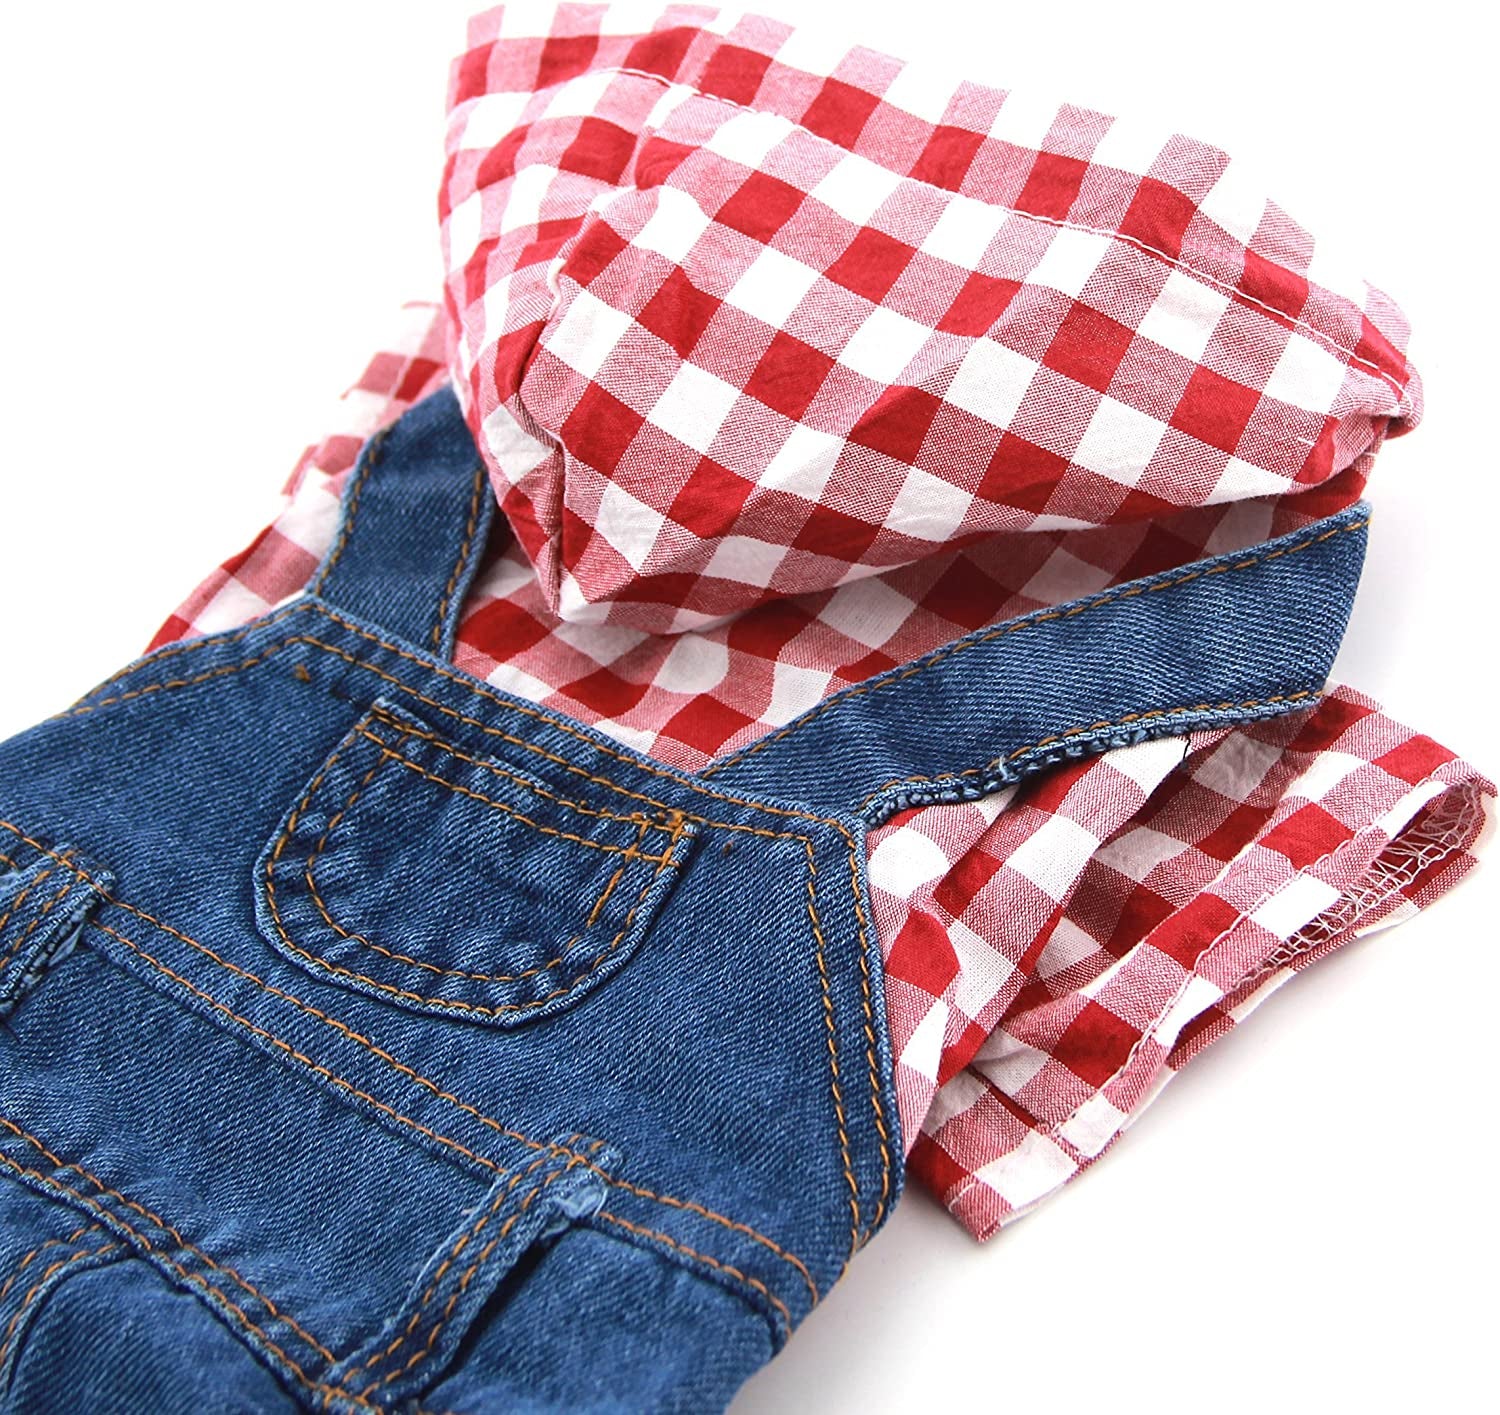 PETCARE Pet Dog Denim Jumpsuit Plaid Hoodies Puppy Overalls Doggy Jeans Jacket Clothes for Small Dogs Cats Chihuahua Yorkie Spring Summer Costume Outfit